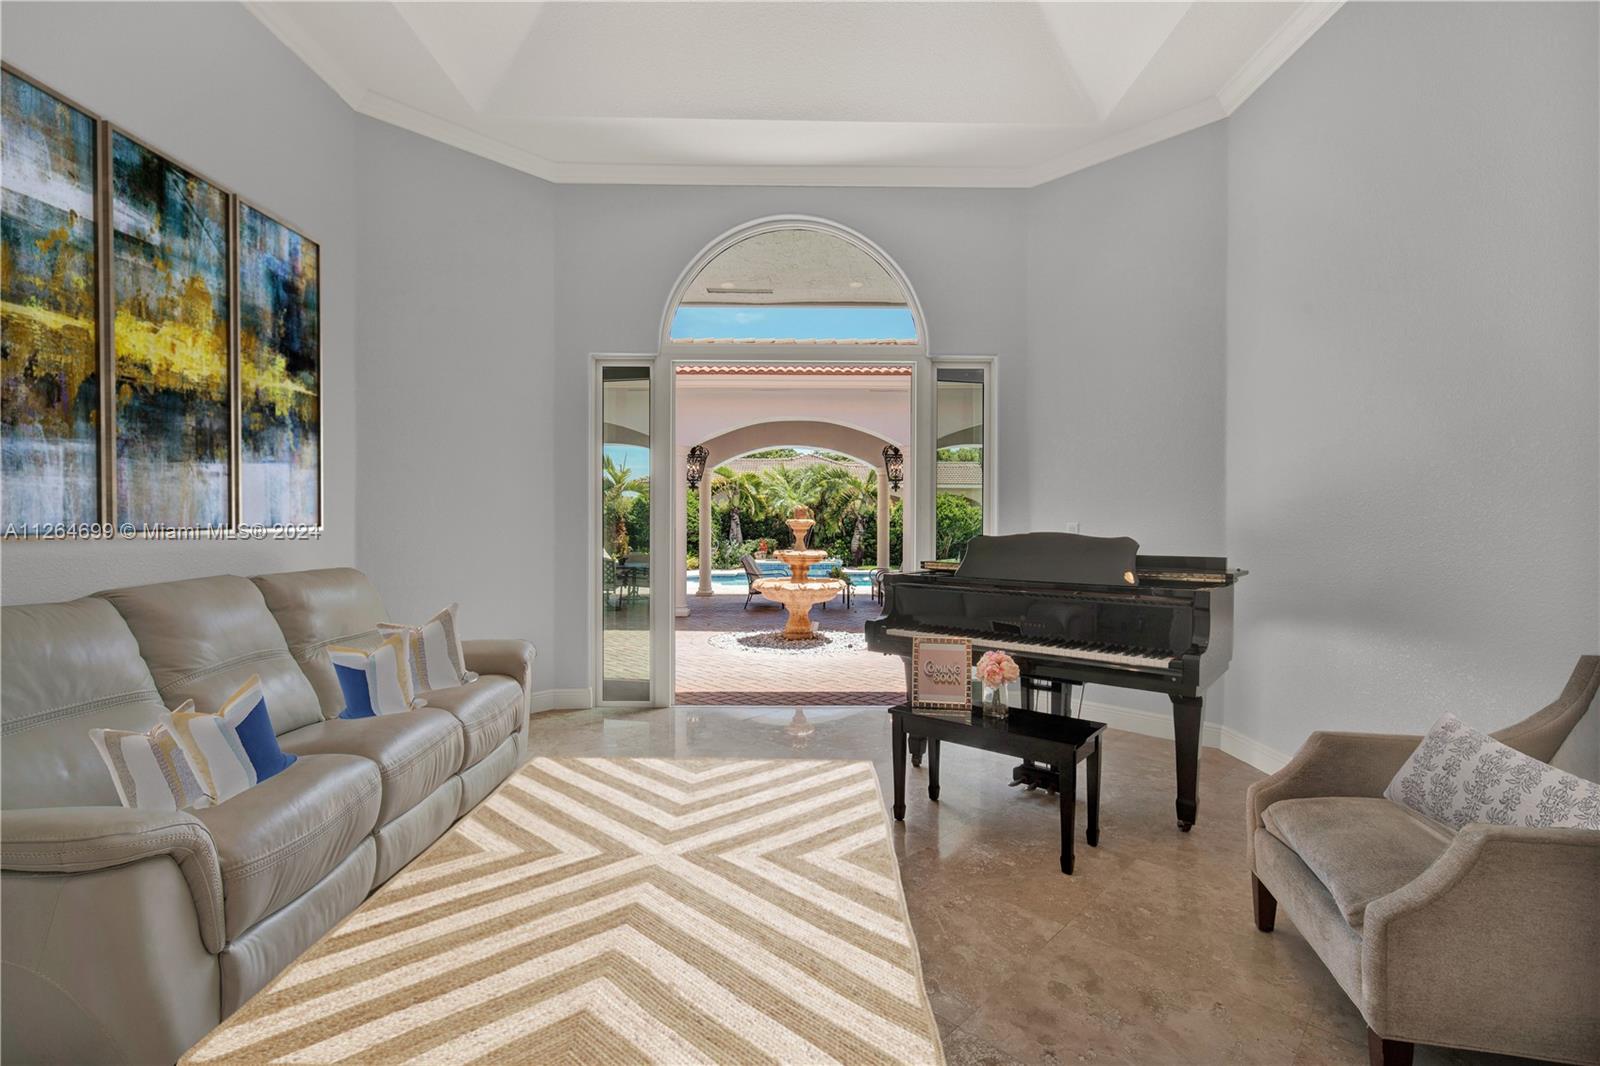 Living Room Boasts a Lovely Fountain Focal-Piece and Great Patio Views!